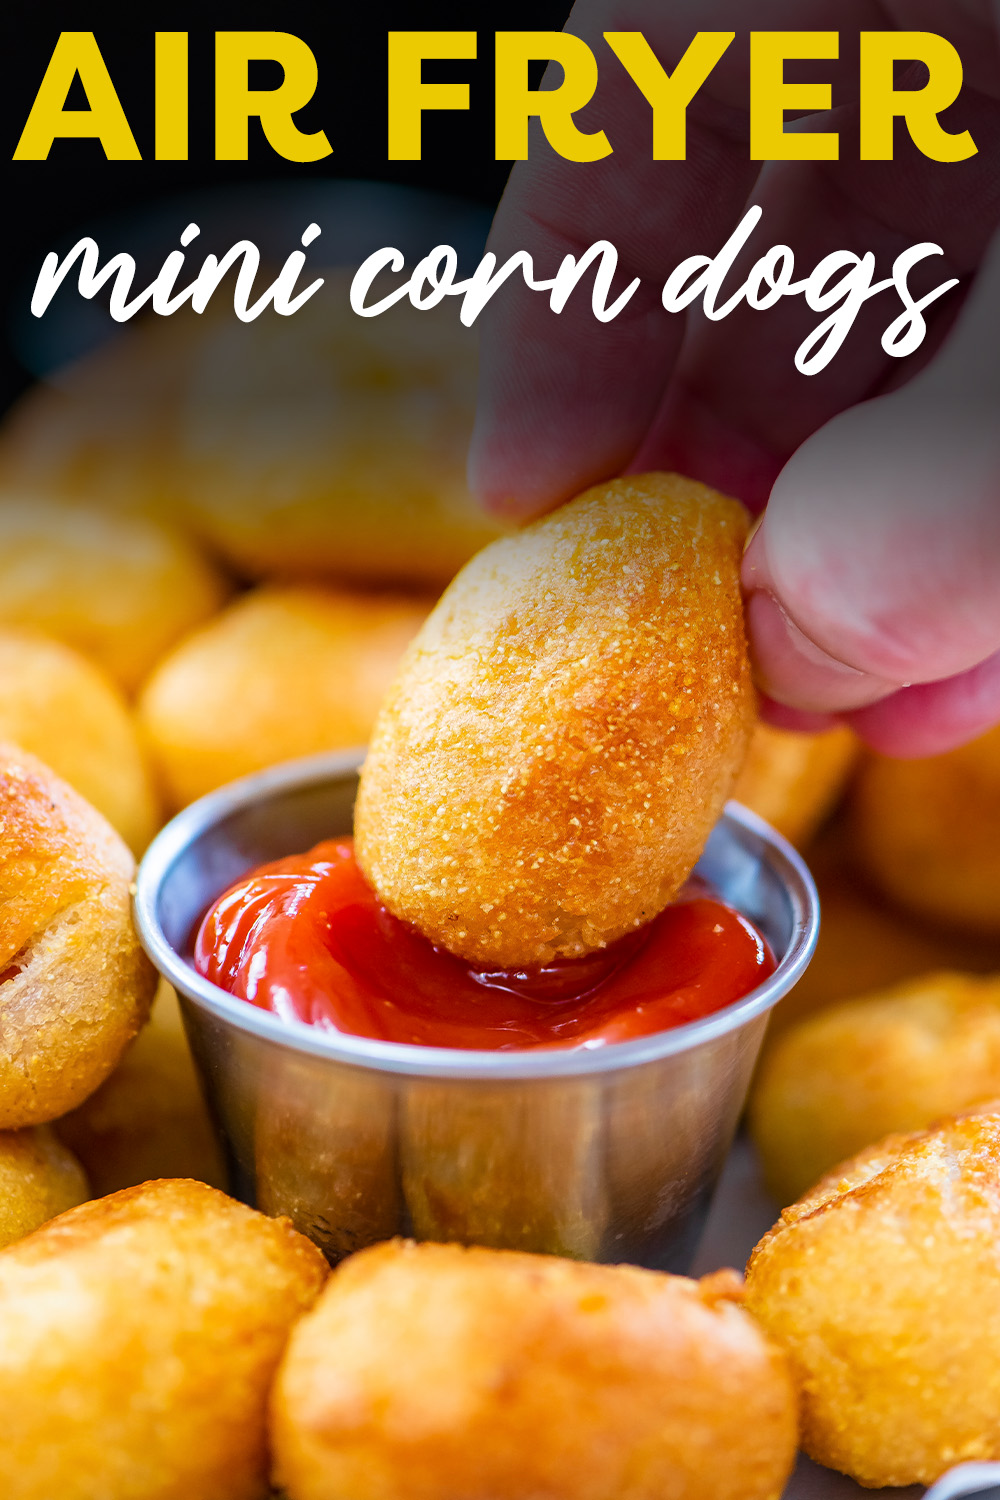 This recipe for air fryer mini corn dogs does a great job of mimicking the deep-fried cornmeal batter!  Best part is, you can use frozen mini corn dogs and still get great results!